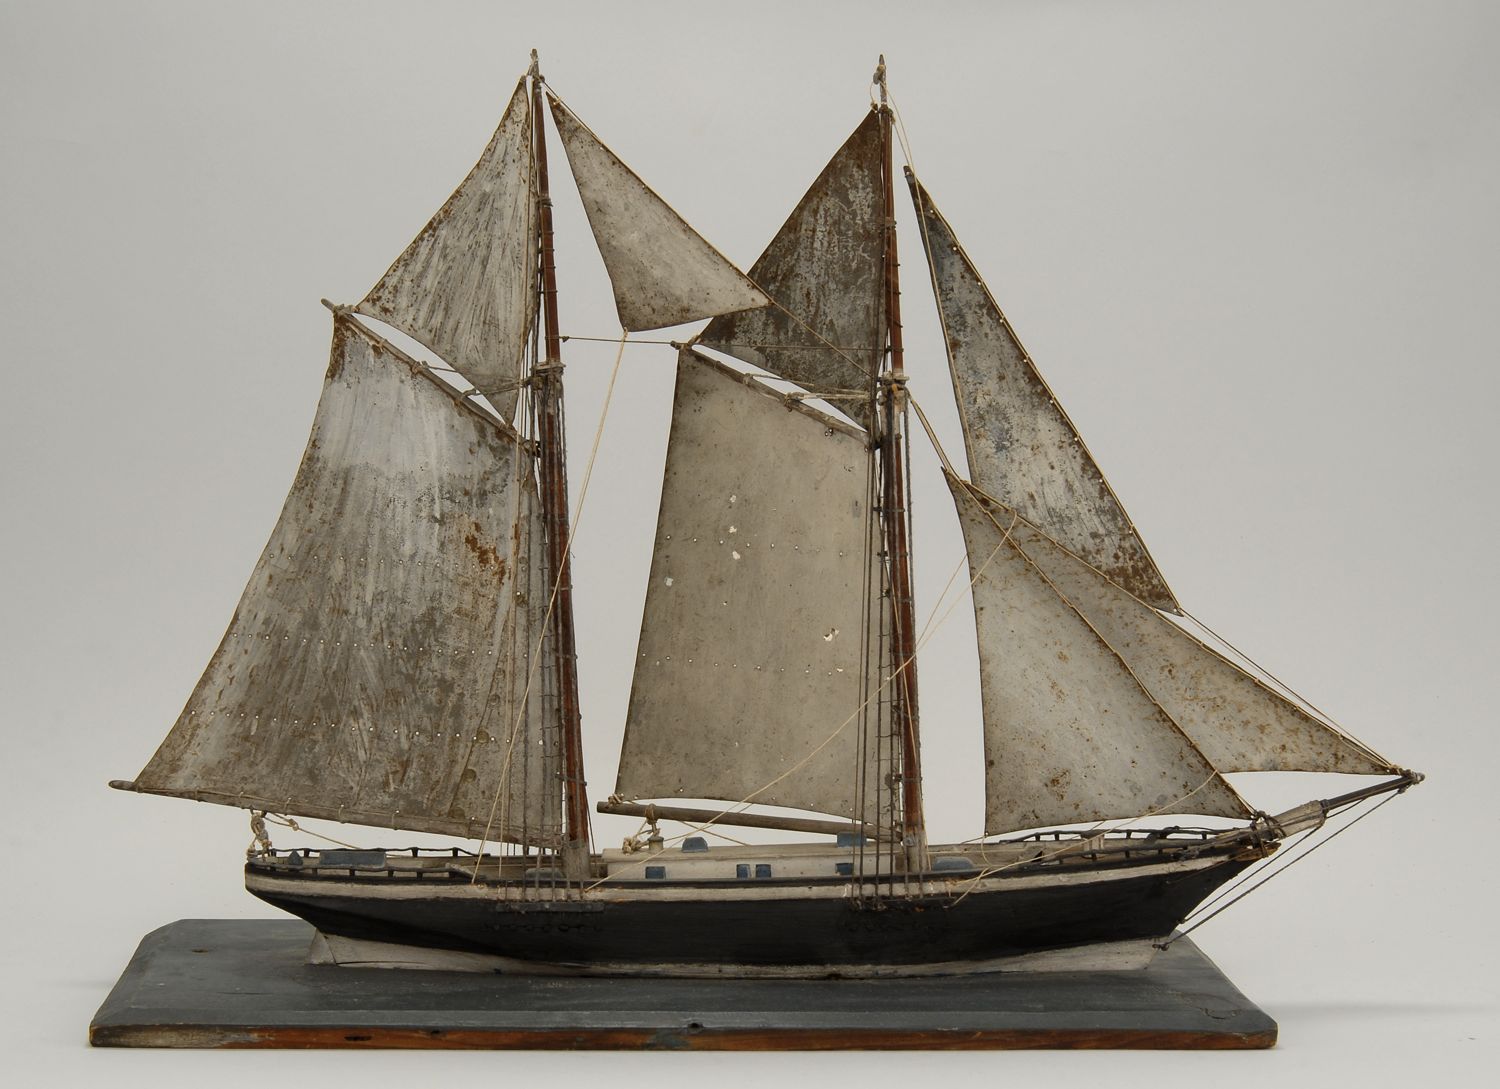 MODEL OF A TWO-MASTED SCHOONERLate